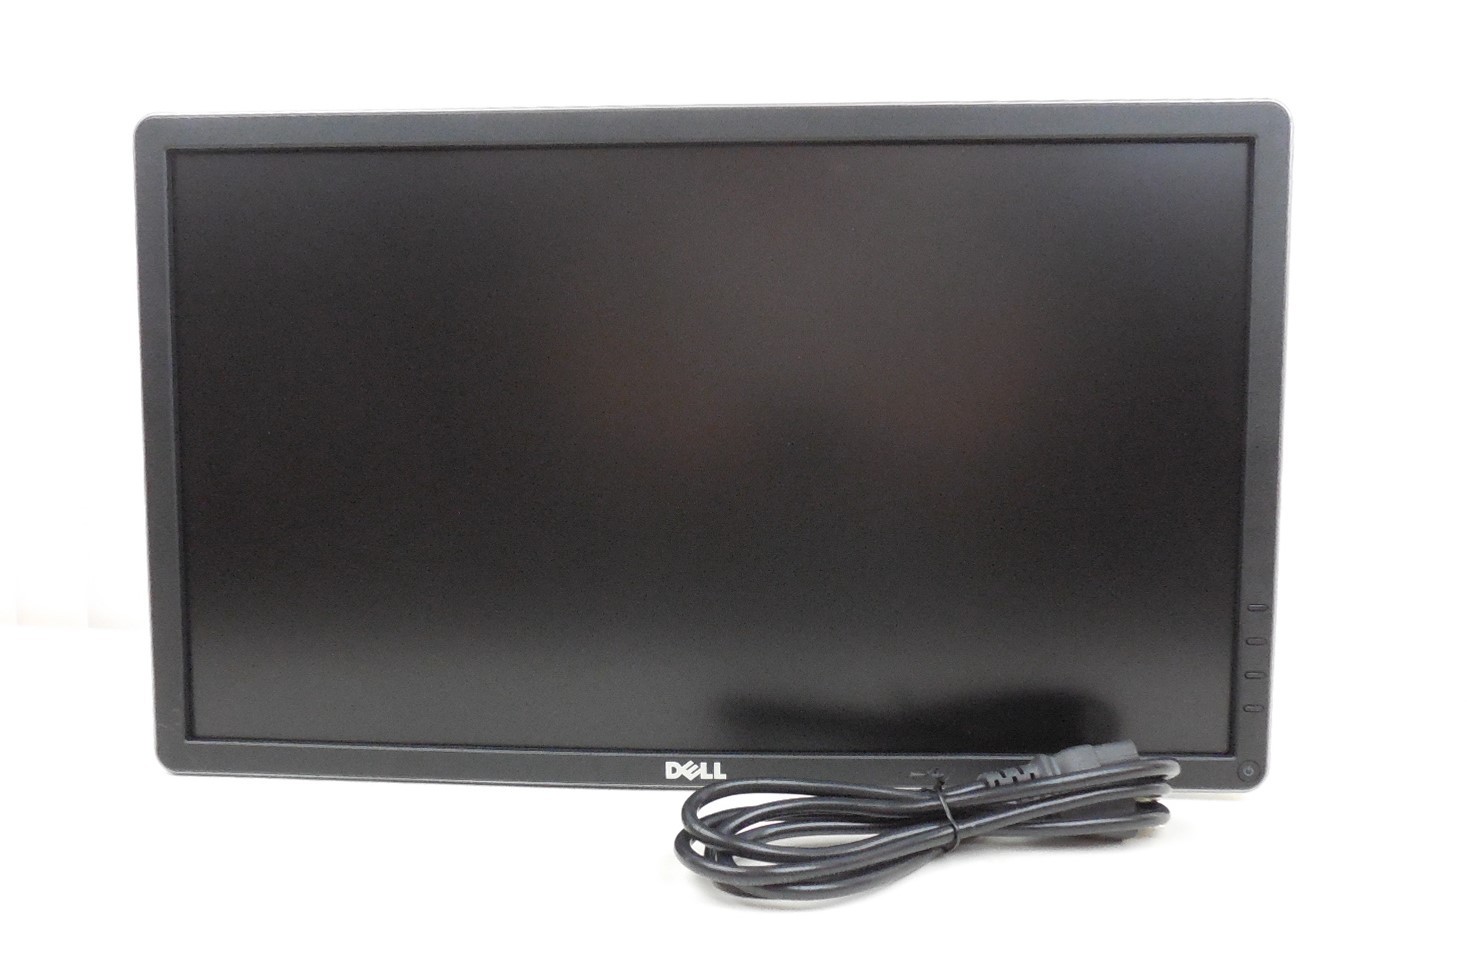 Dell P2214Hb 22" FHD 1920x1080 LCD Monitor - No Stand